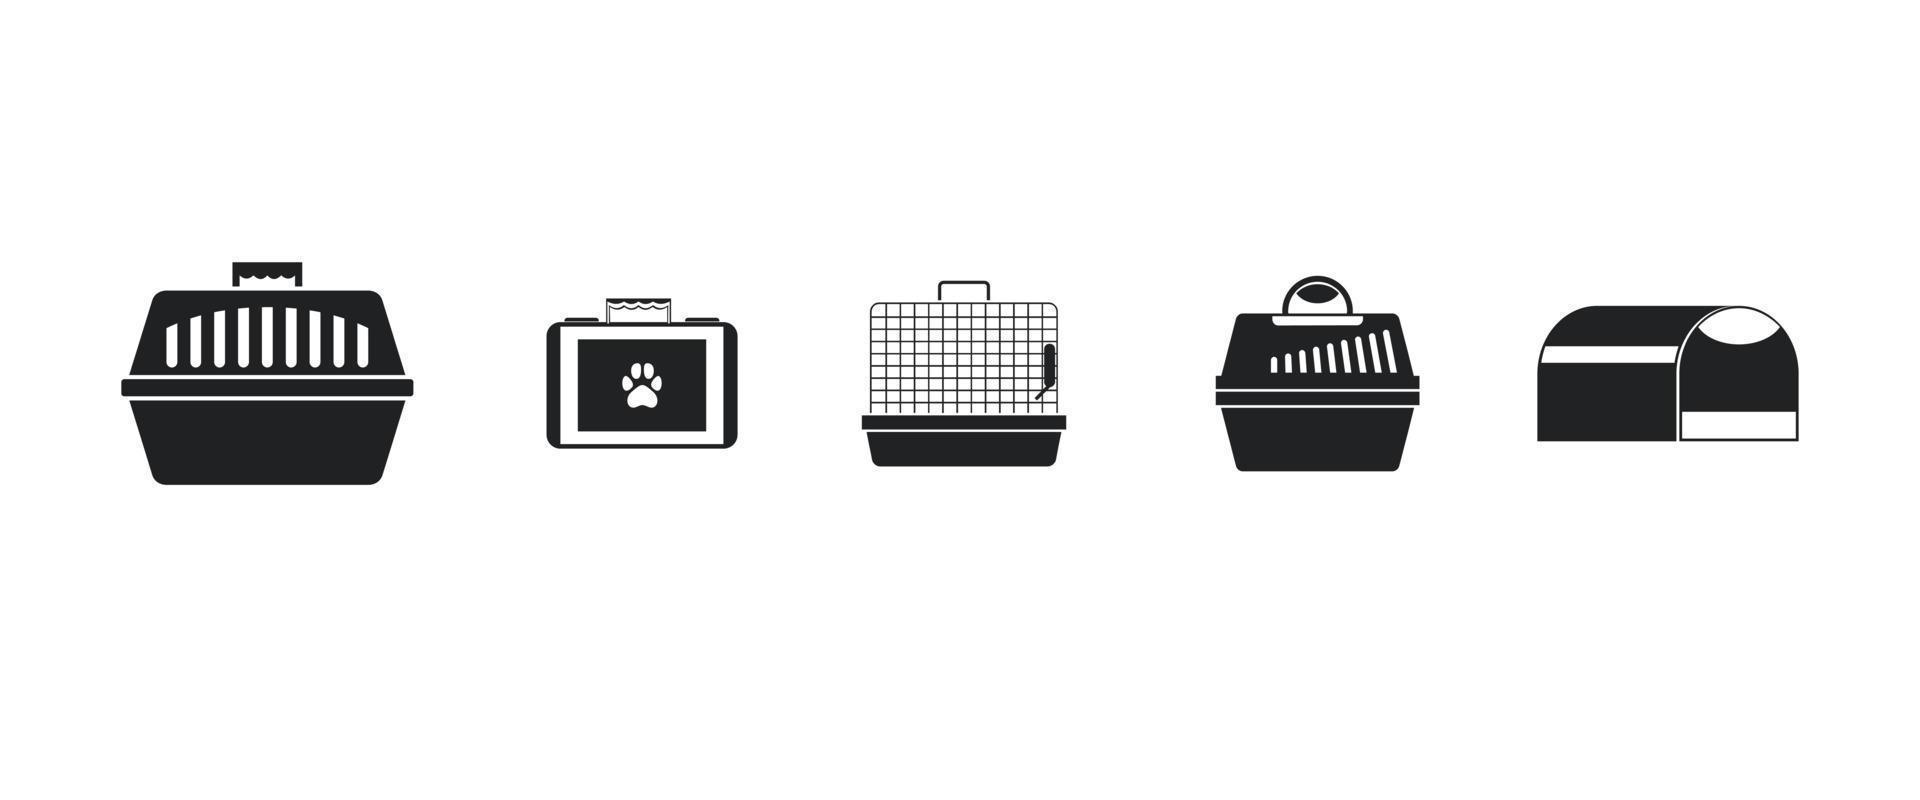 Pet cage icon set, simple style vector